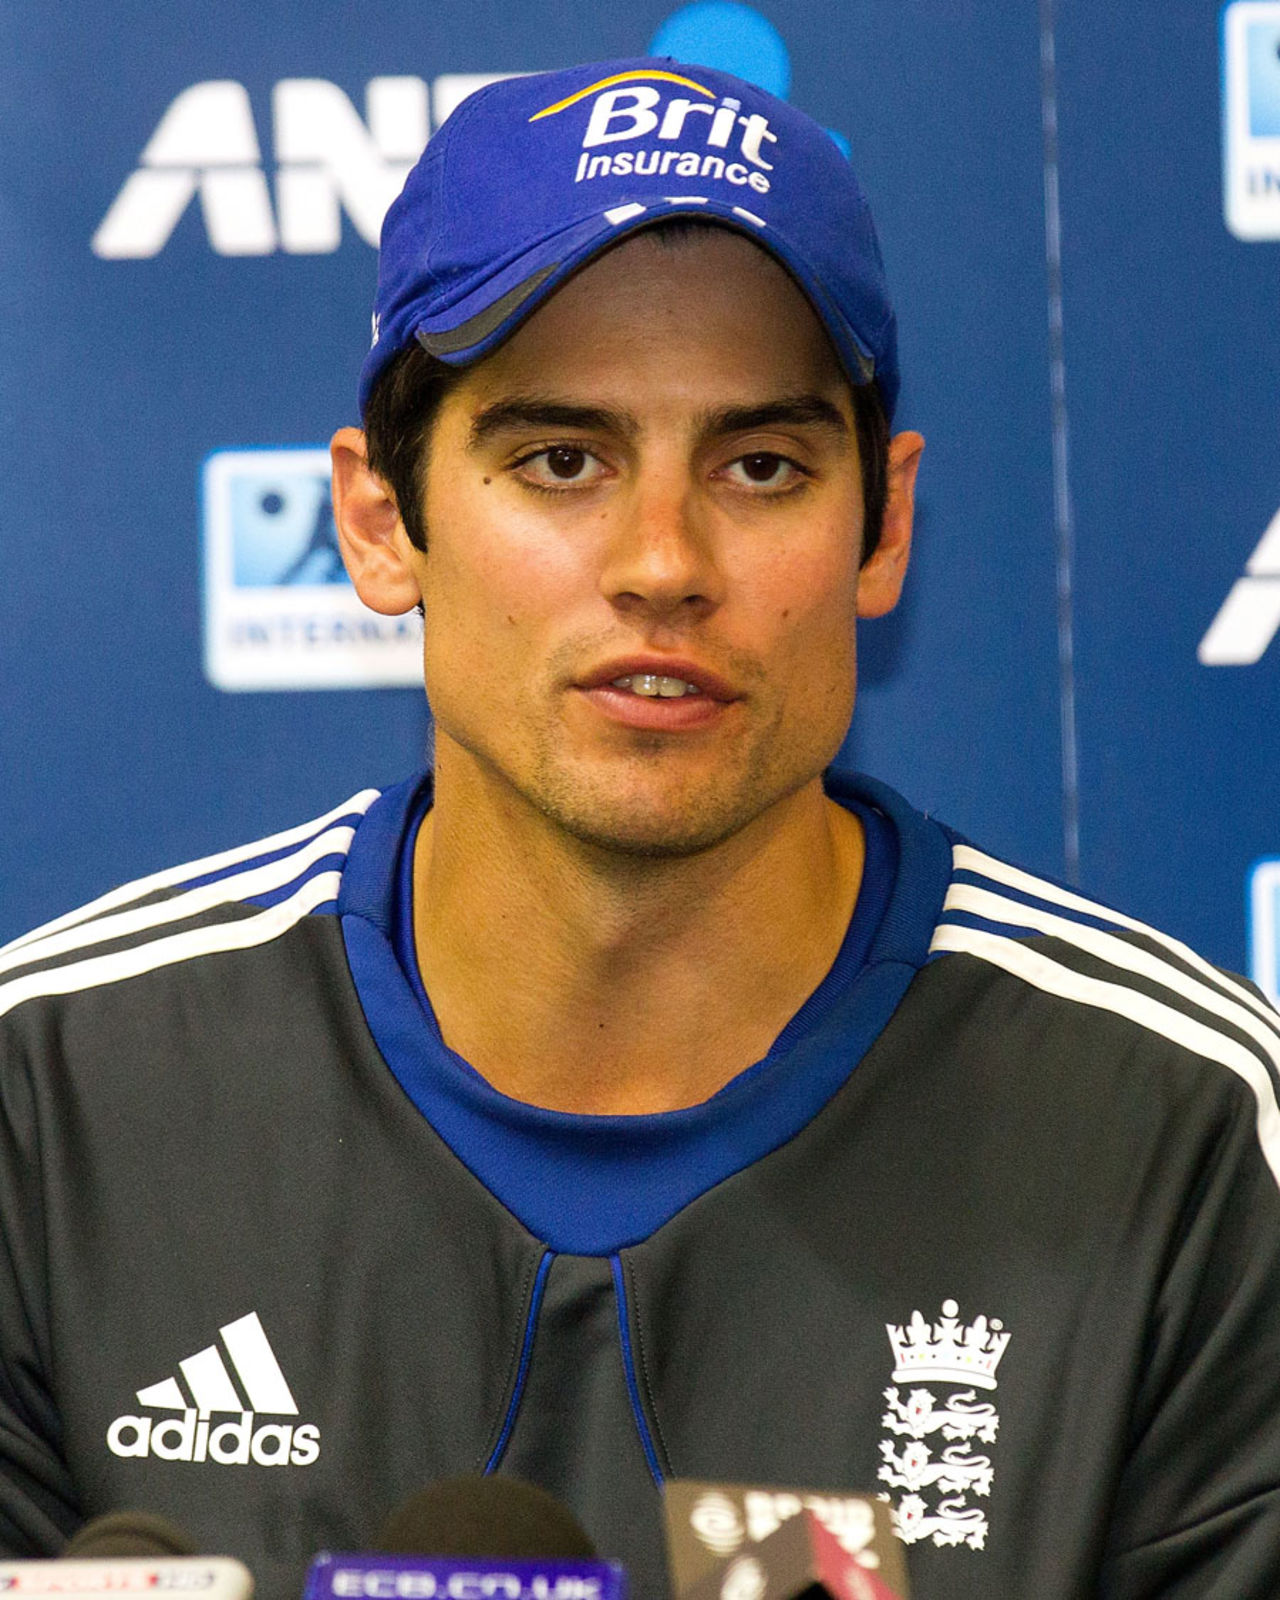 England captain Alastair Cook speaks to the media after the Wellington Test, New Zealand v England, 2nd Test, 5th day, Wellington, March 18, 2013